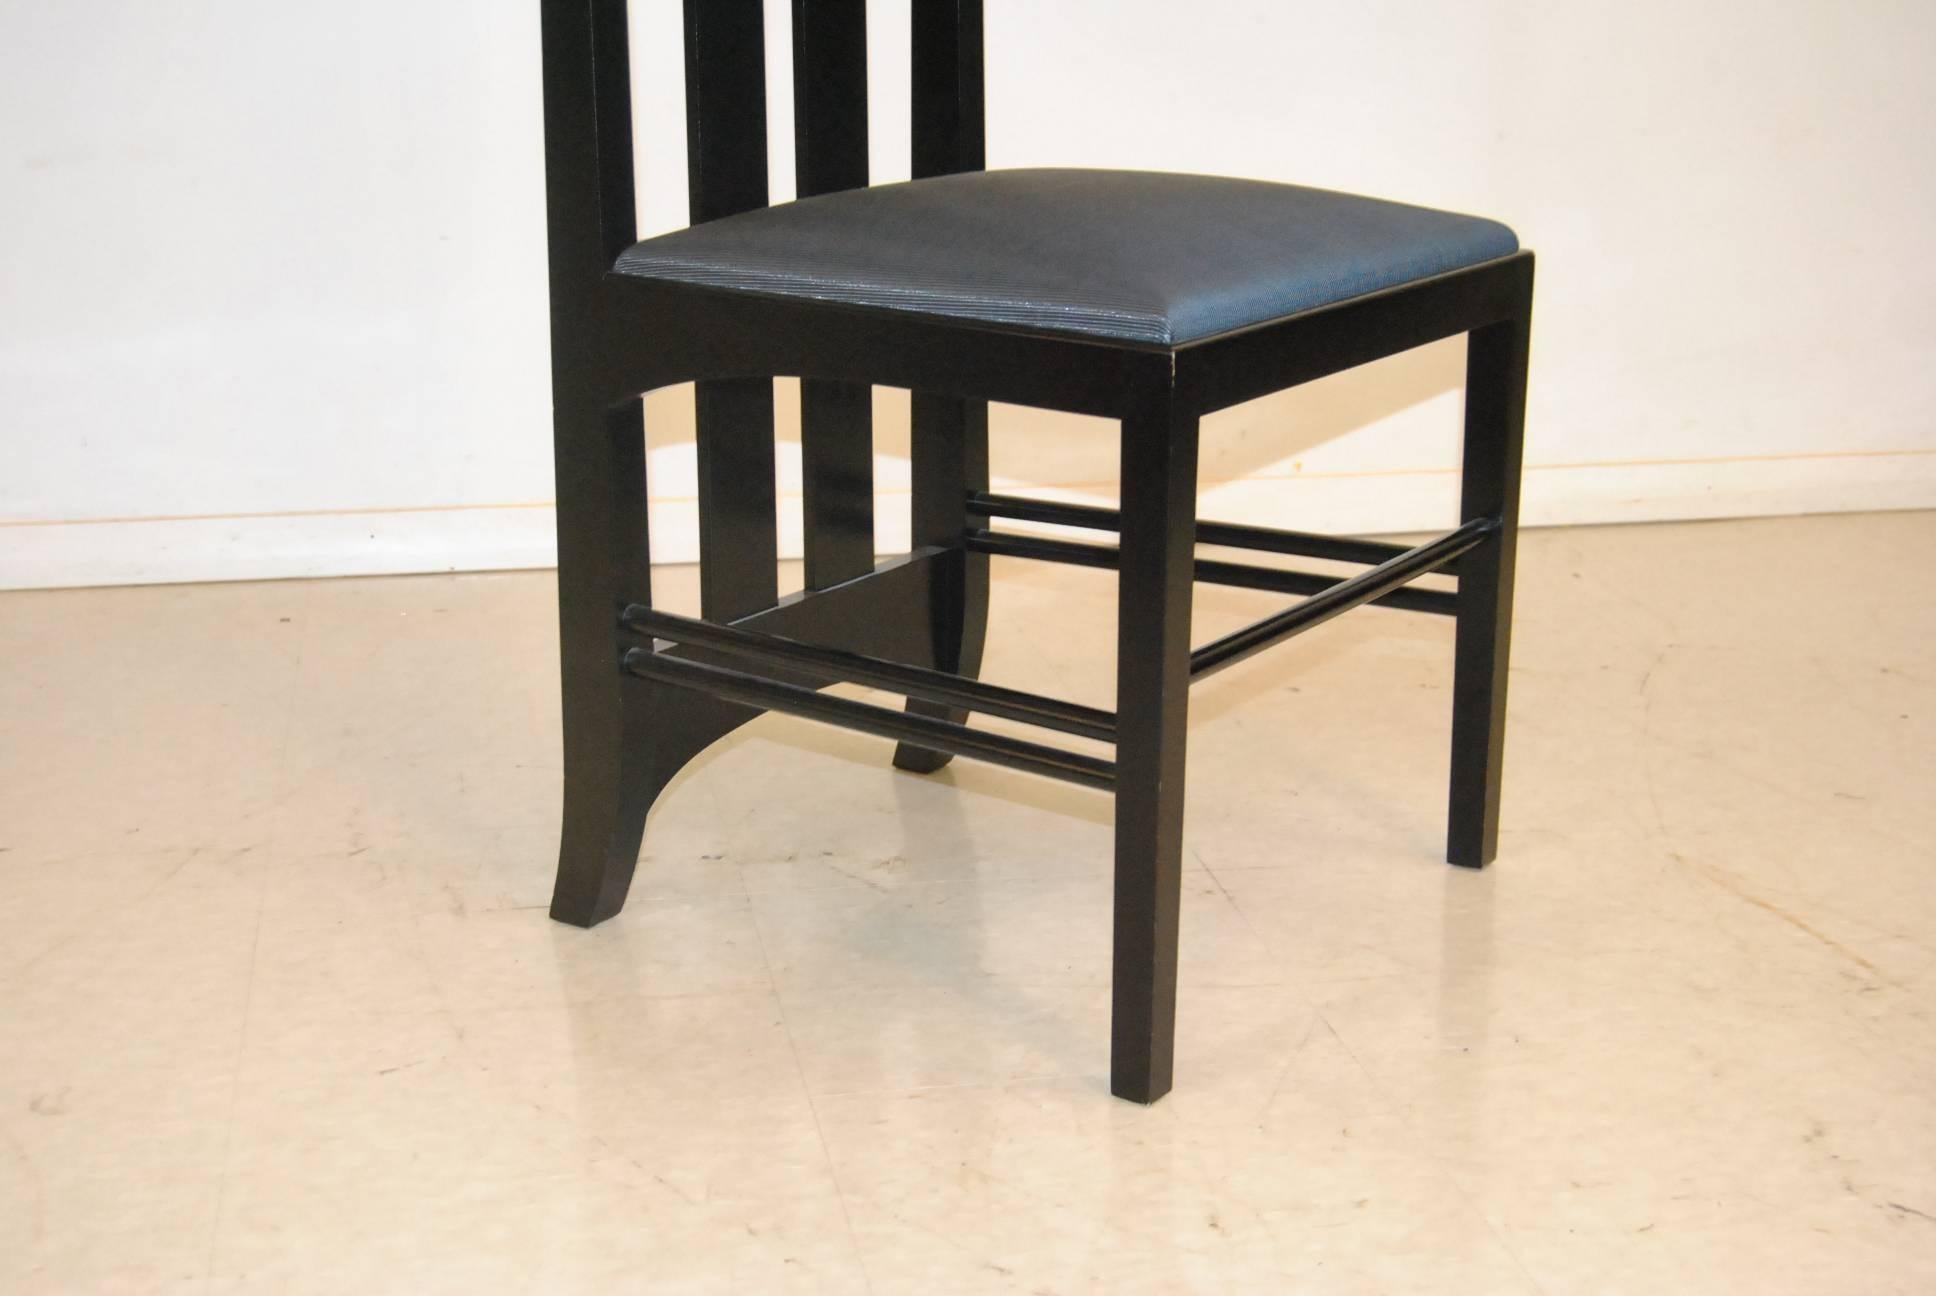  This black lacquered high back chair was designed by Charles Rennie Mackintosh and produced posthumously sometime, circa 1970. The chair was produced by Cassina in solid ash with ebony finish. The chairs name is taken from the Ingram tea rooms in